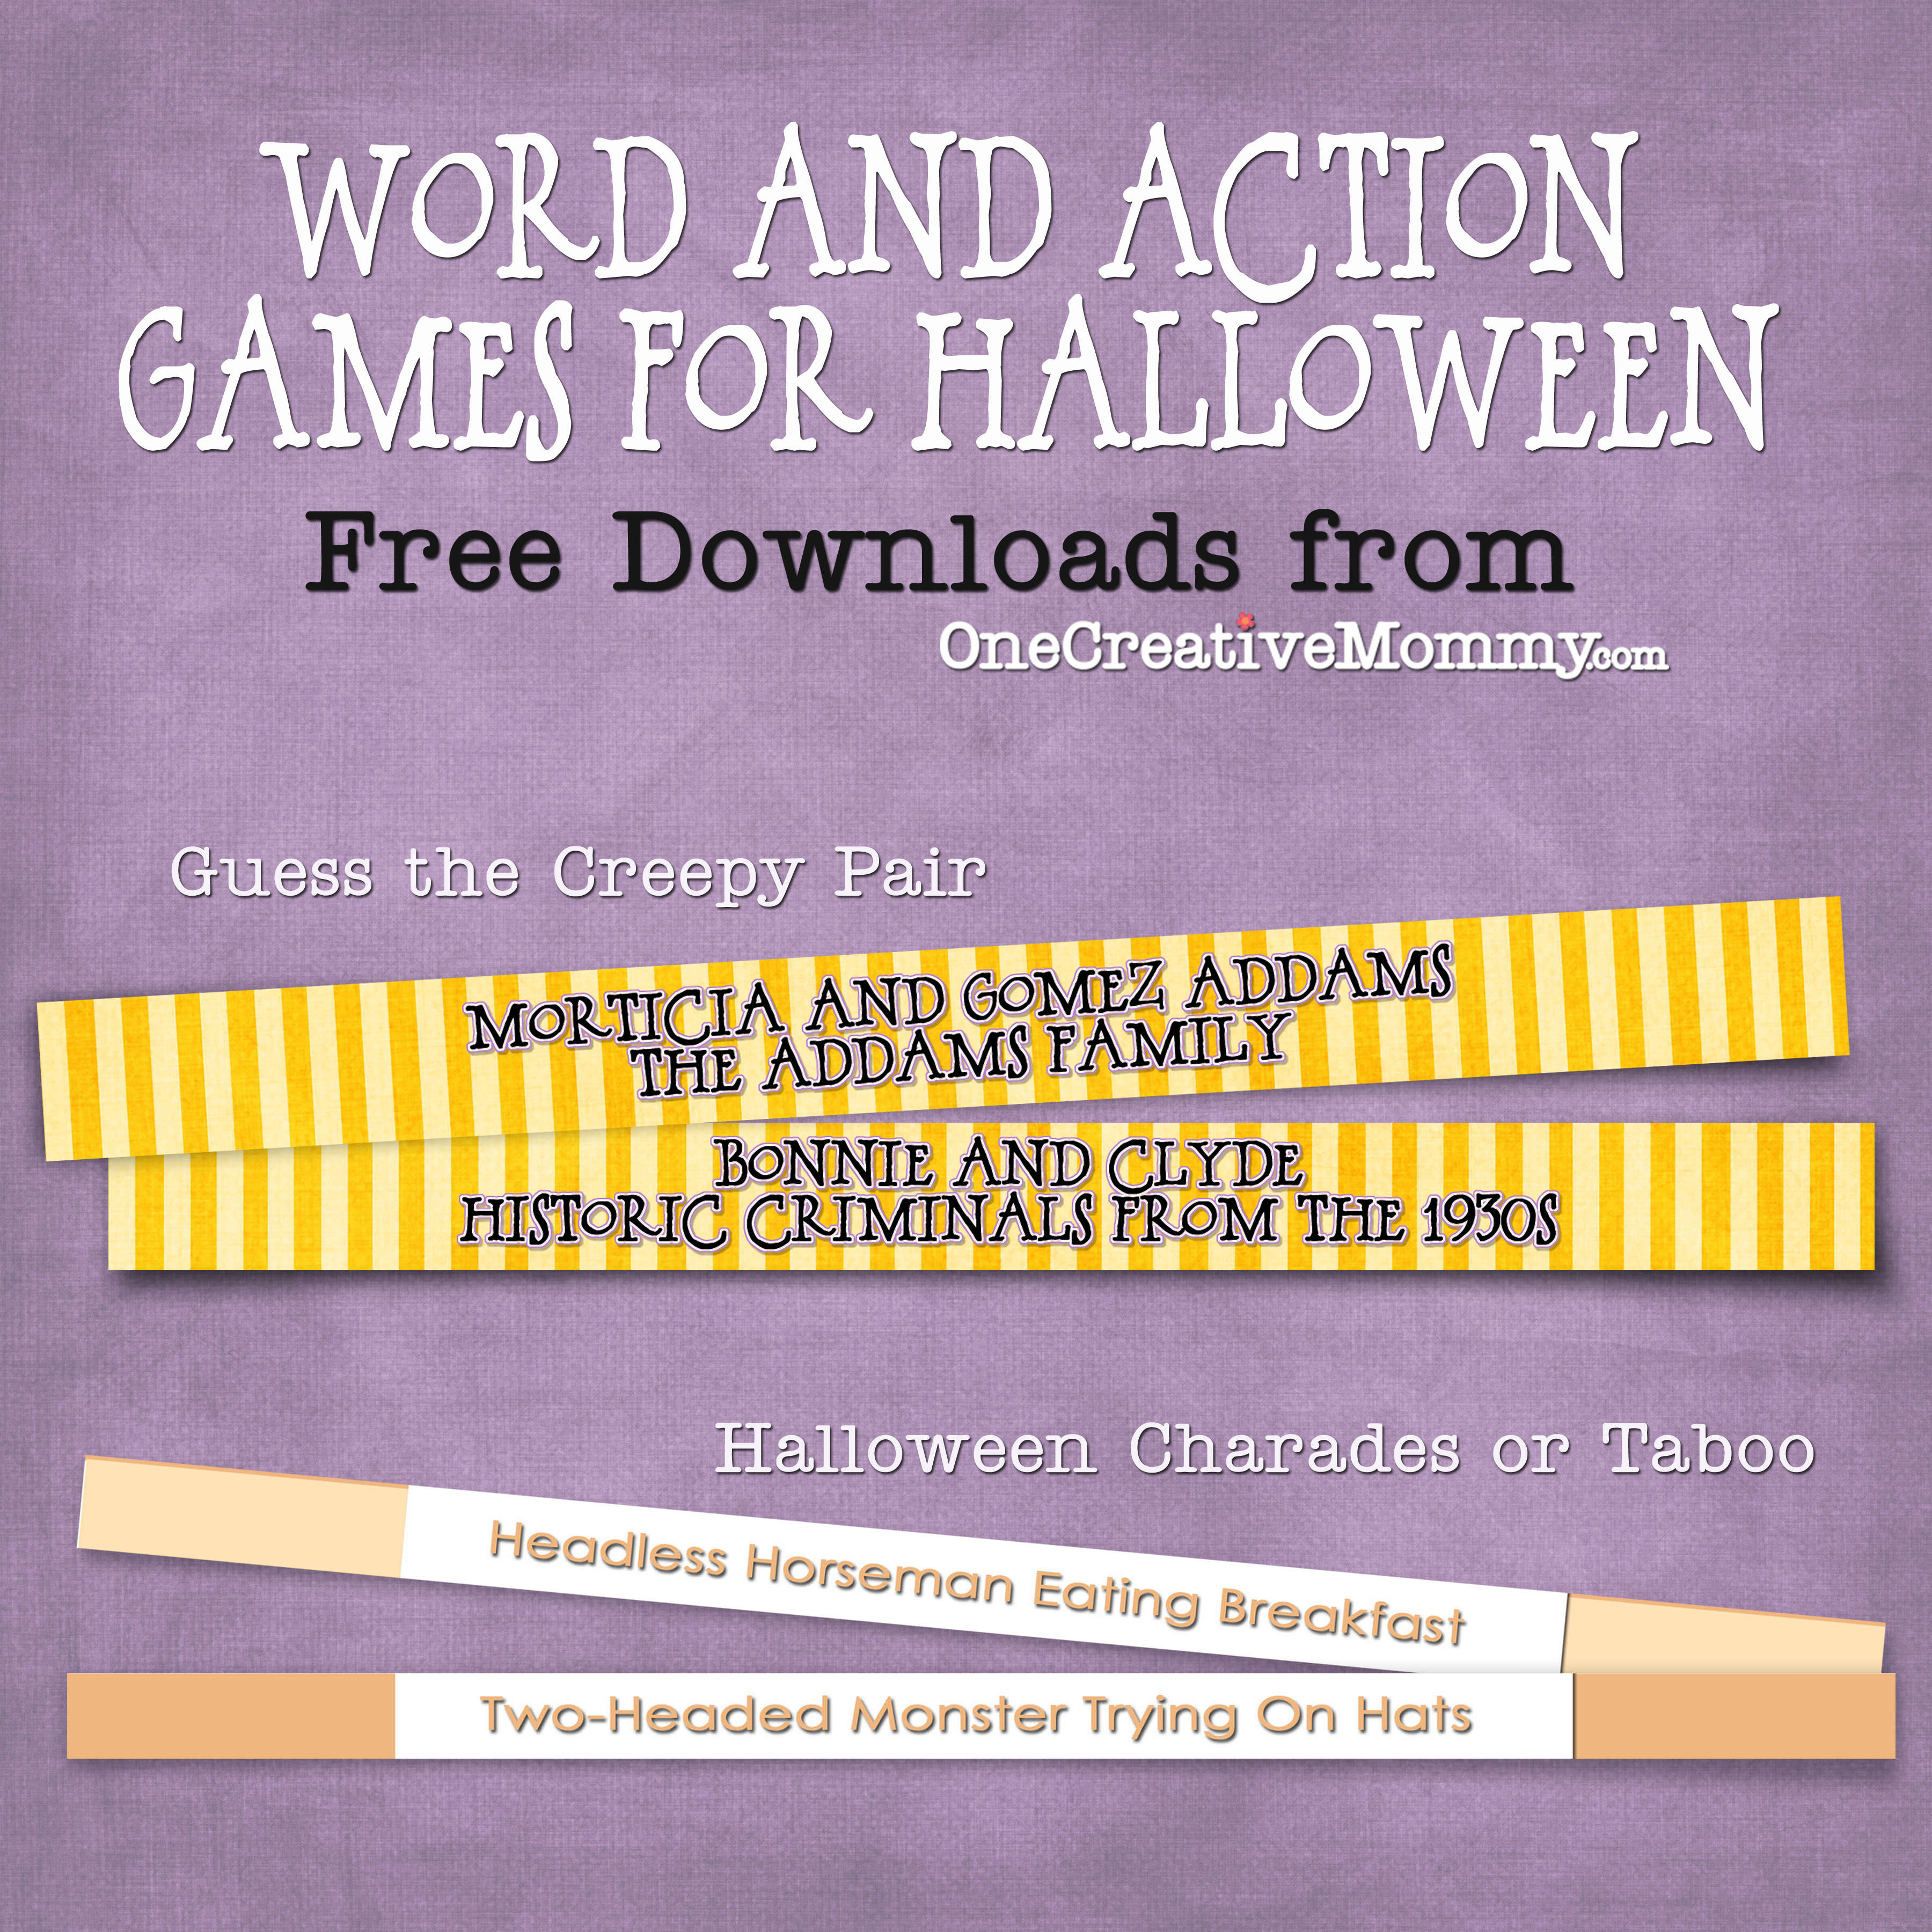 What are some Halloween party games for kids?